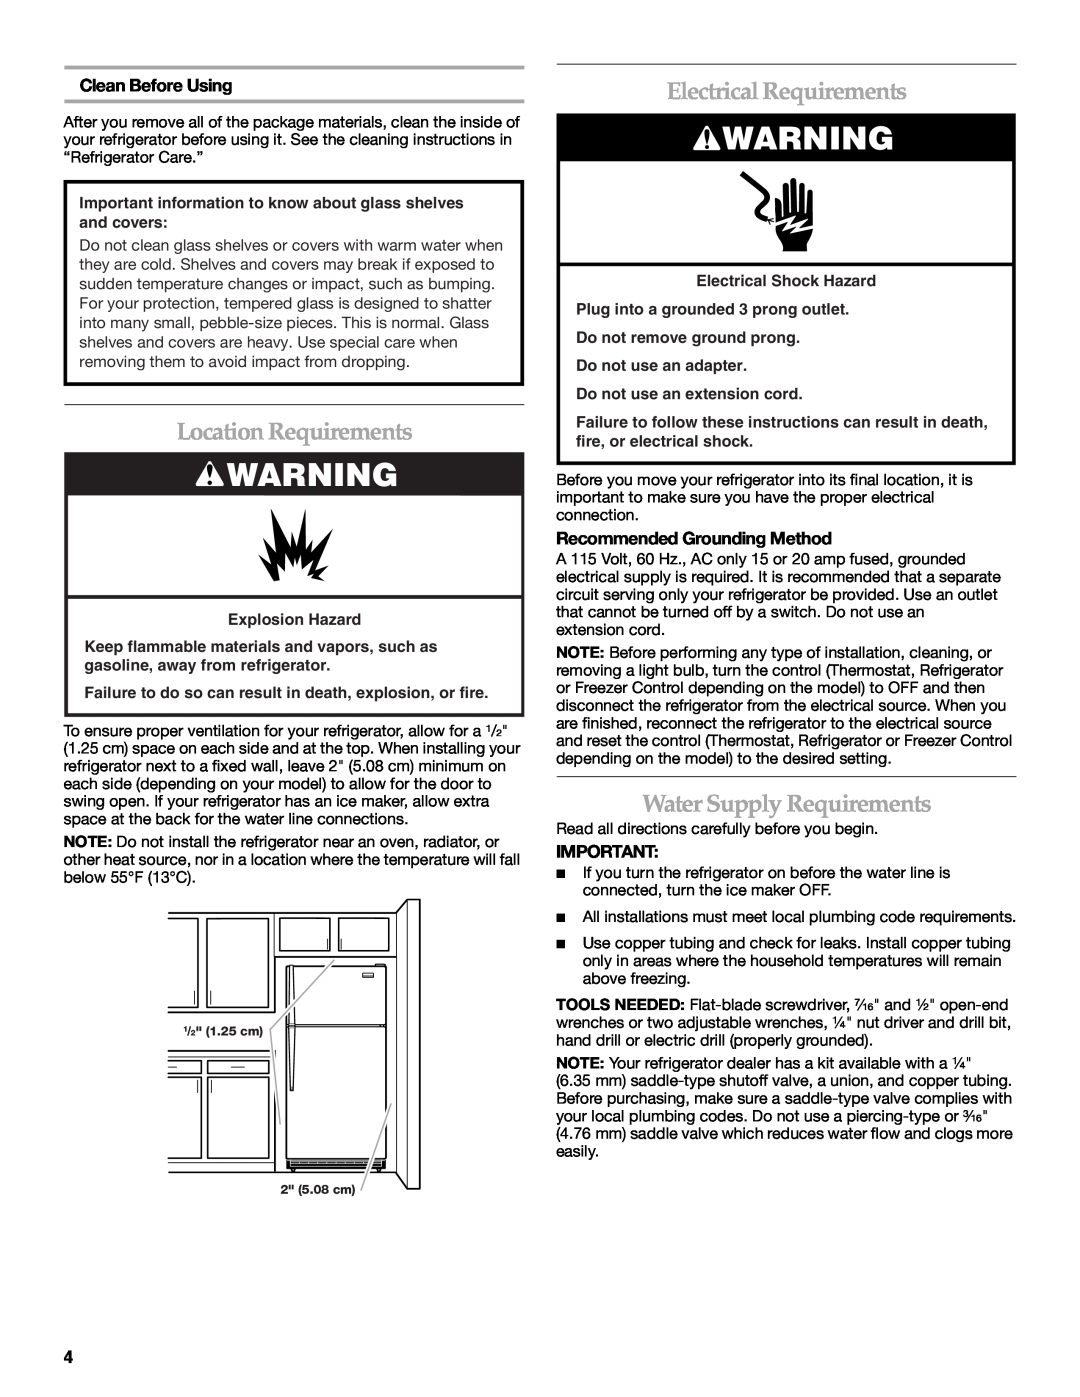 KitchenAid TOP-MOUNT REFRIGERATOR manual Location Requirements, Electrical Requirements, Water Supply Requirements 